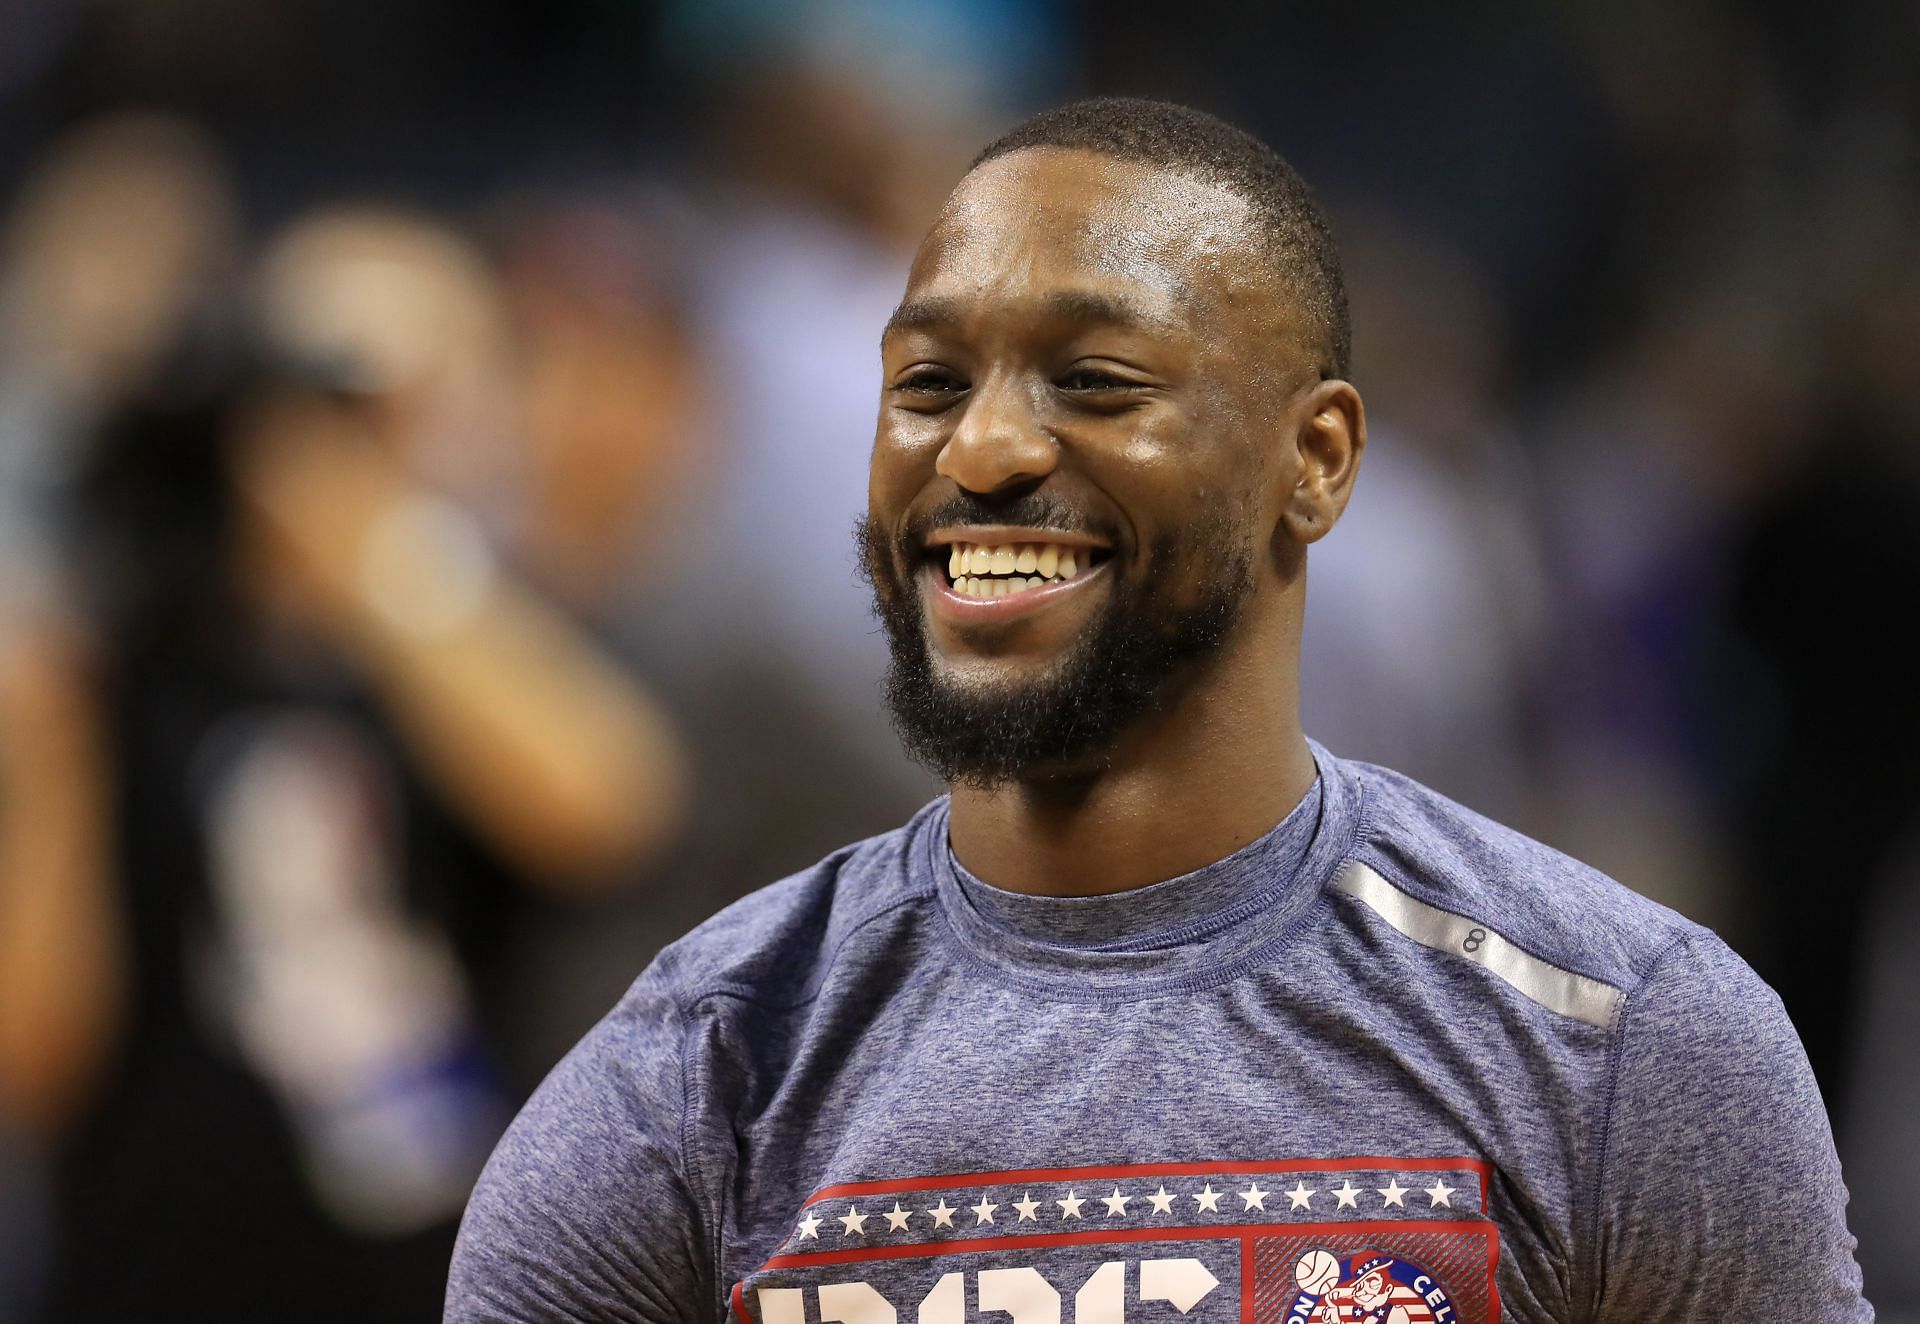 Kemba Walker was drafted ninth overall by the Hornets (then Bobcats) in 2011. He played eight seasons in Charlotte and got traded to the Celtics in 2019.